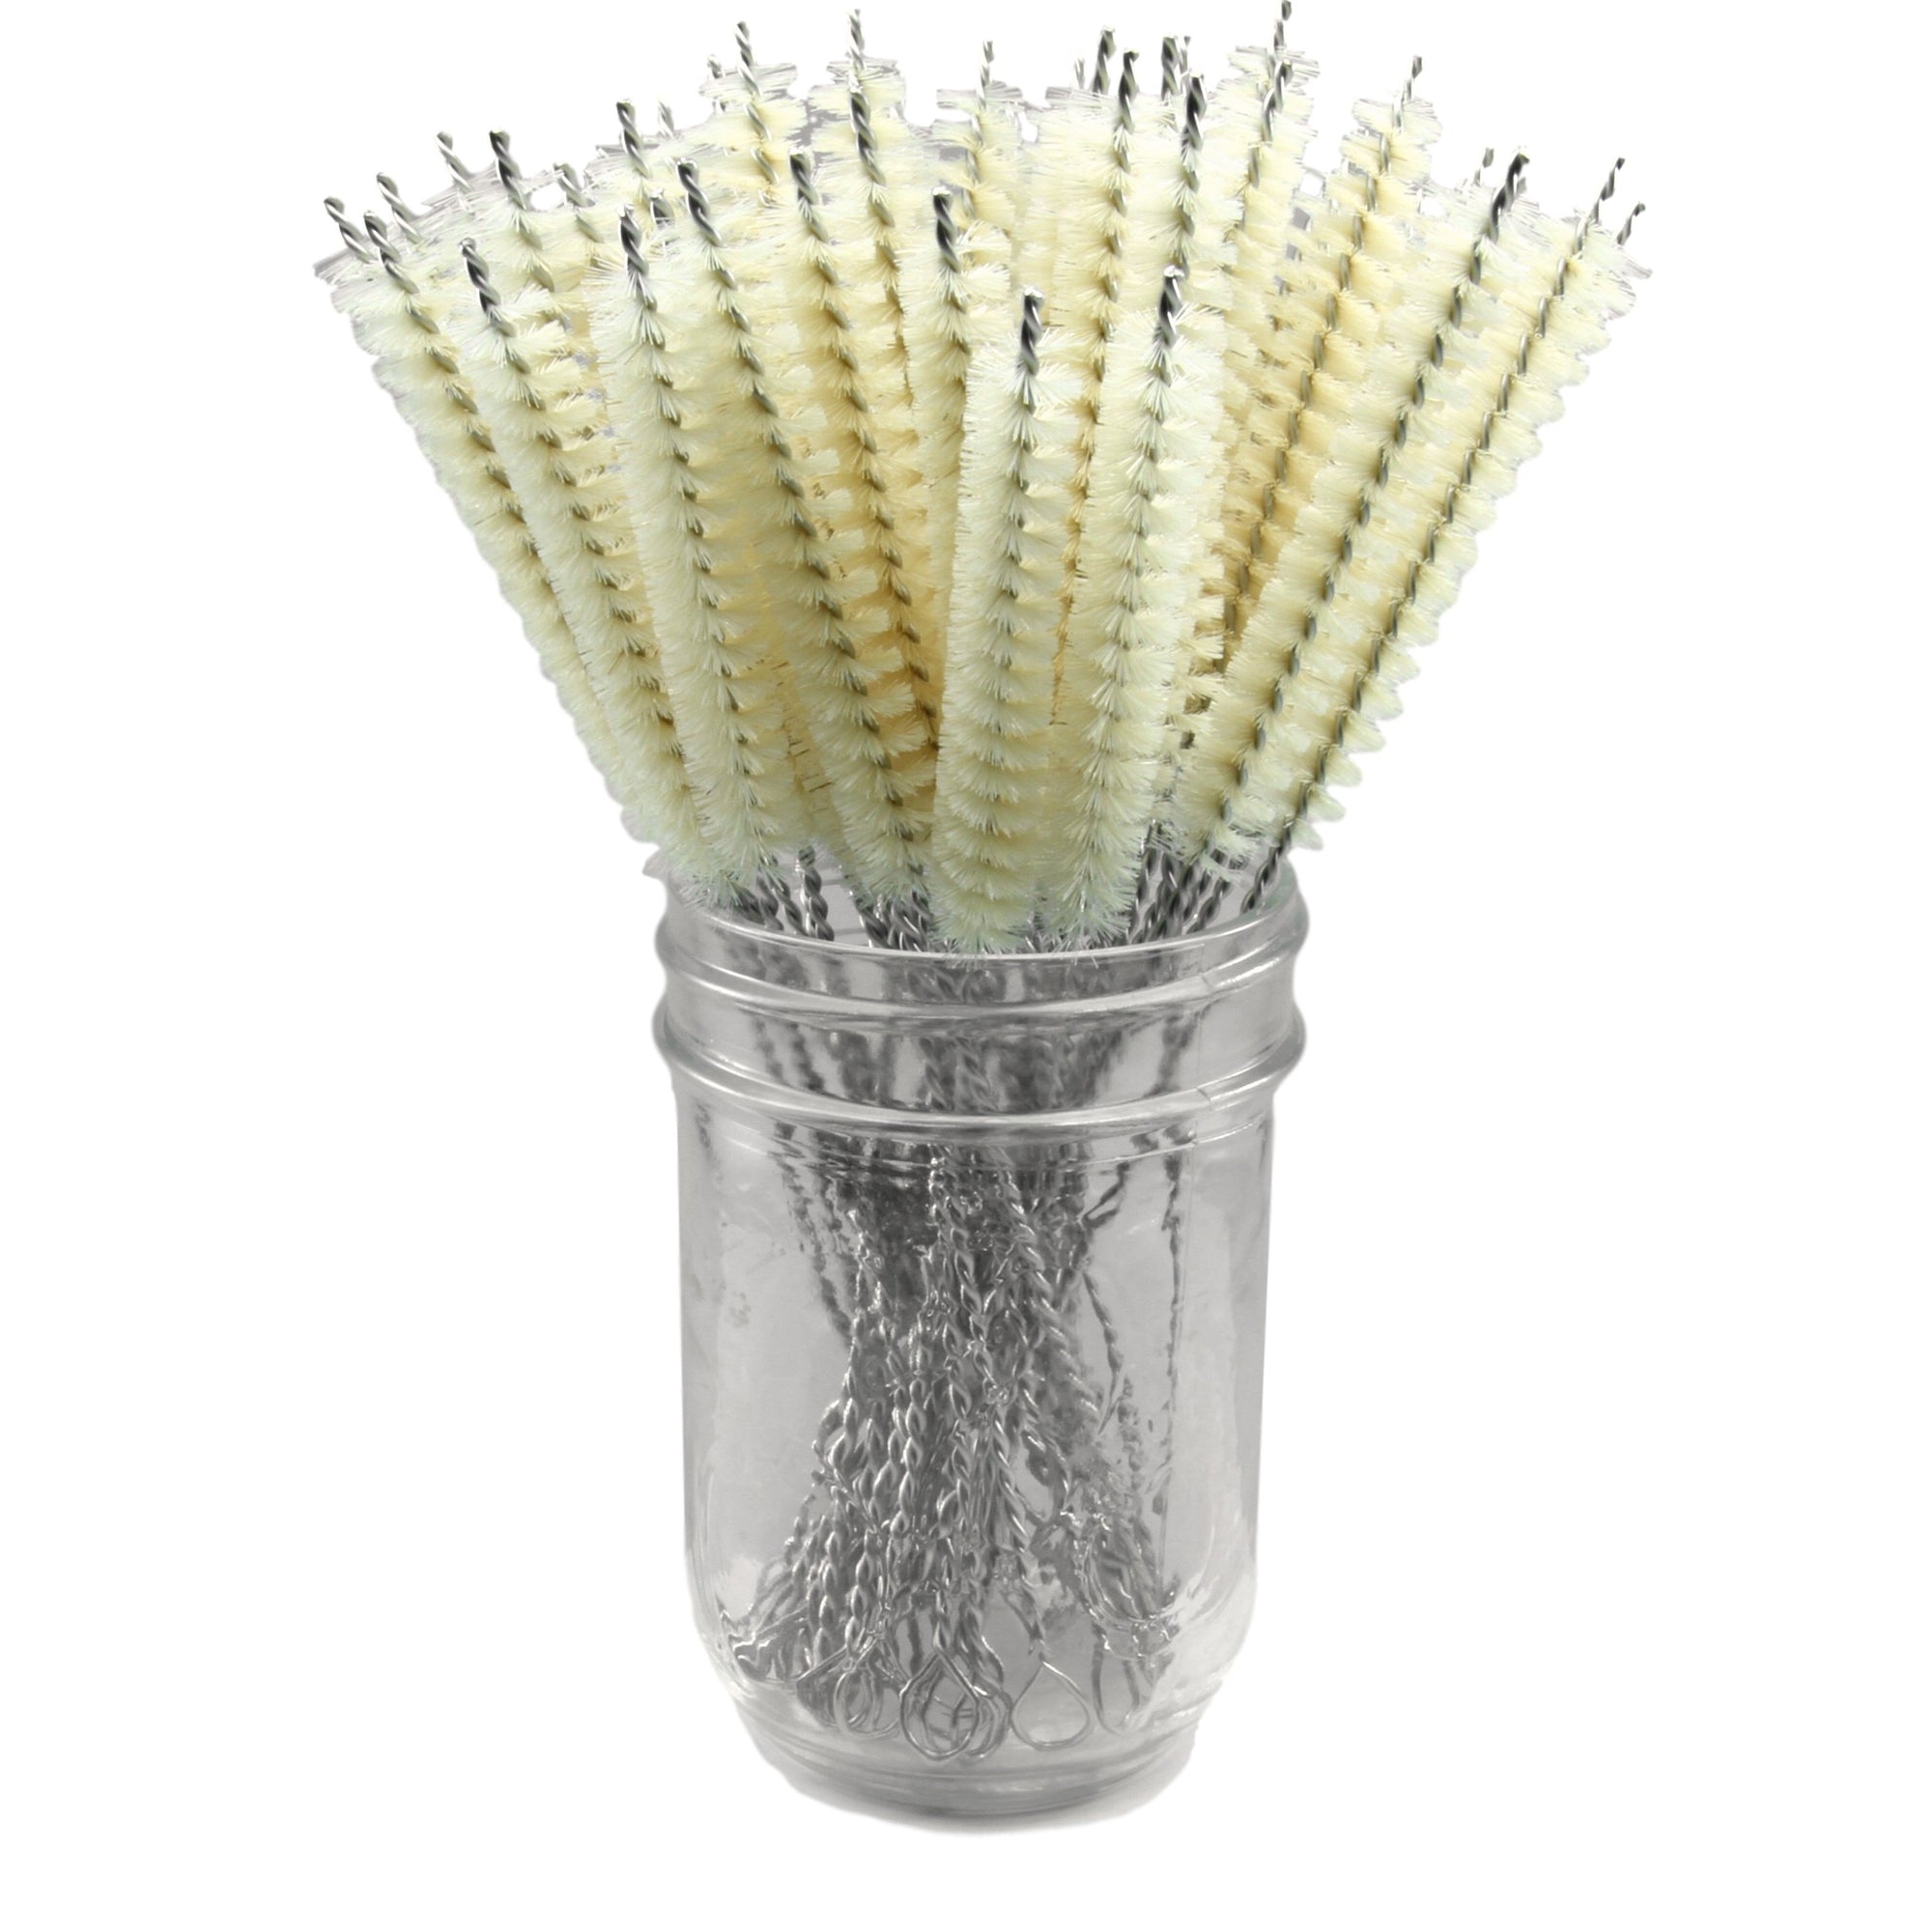 natural bristle cleaning brush for reusable straws